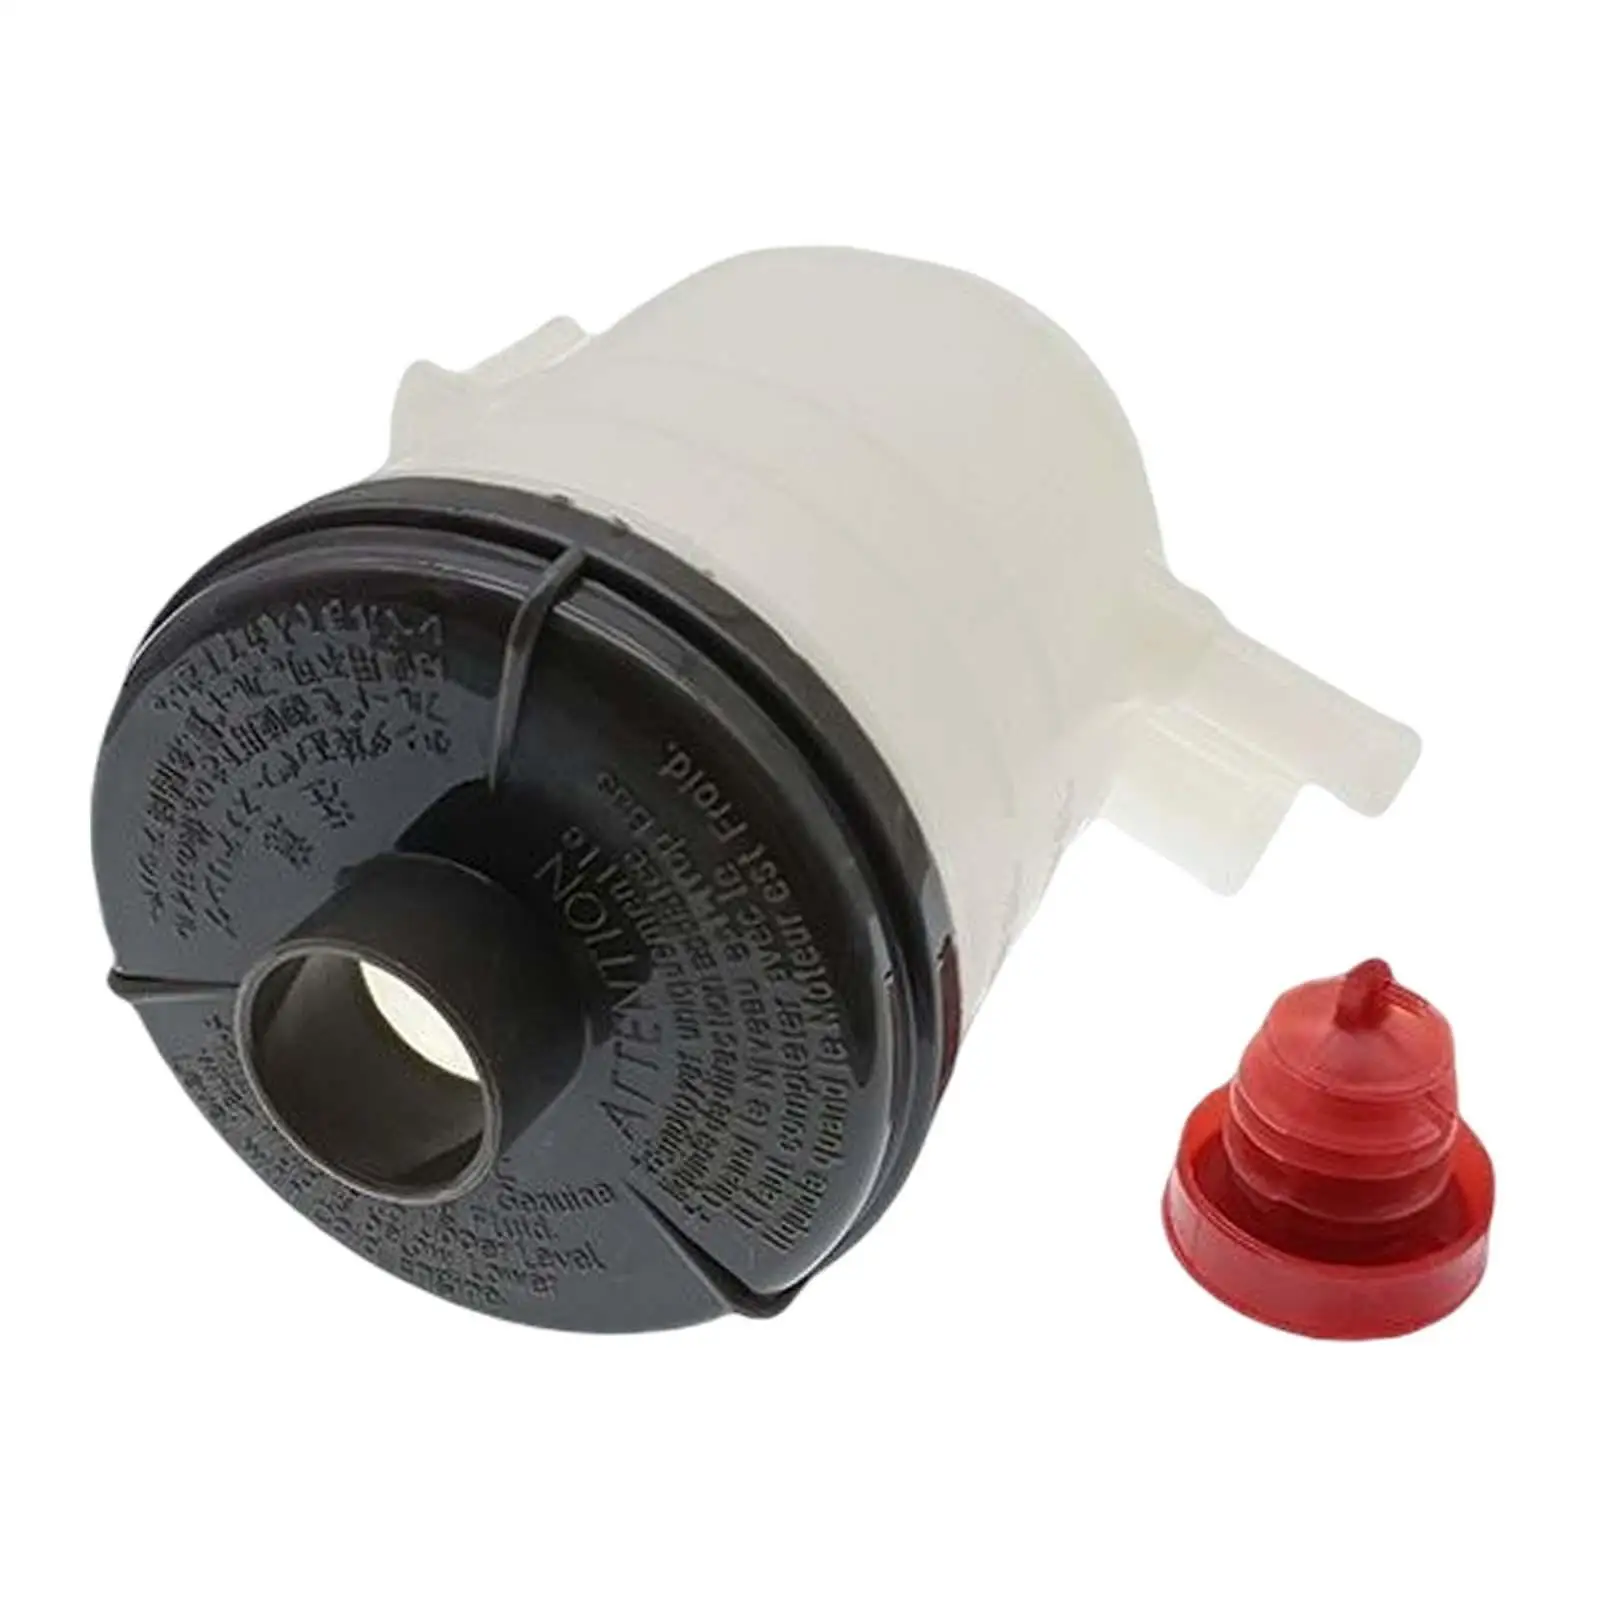 

Power Steering Pump Reservoir Replaces Easy to Install Parts Practical Portable Booster Pump Oil Cup for Honda Accord 98-02